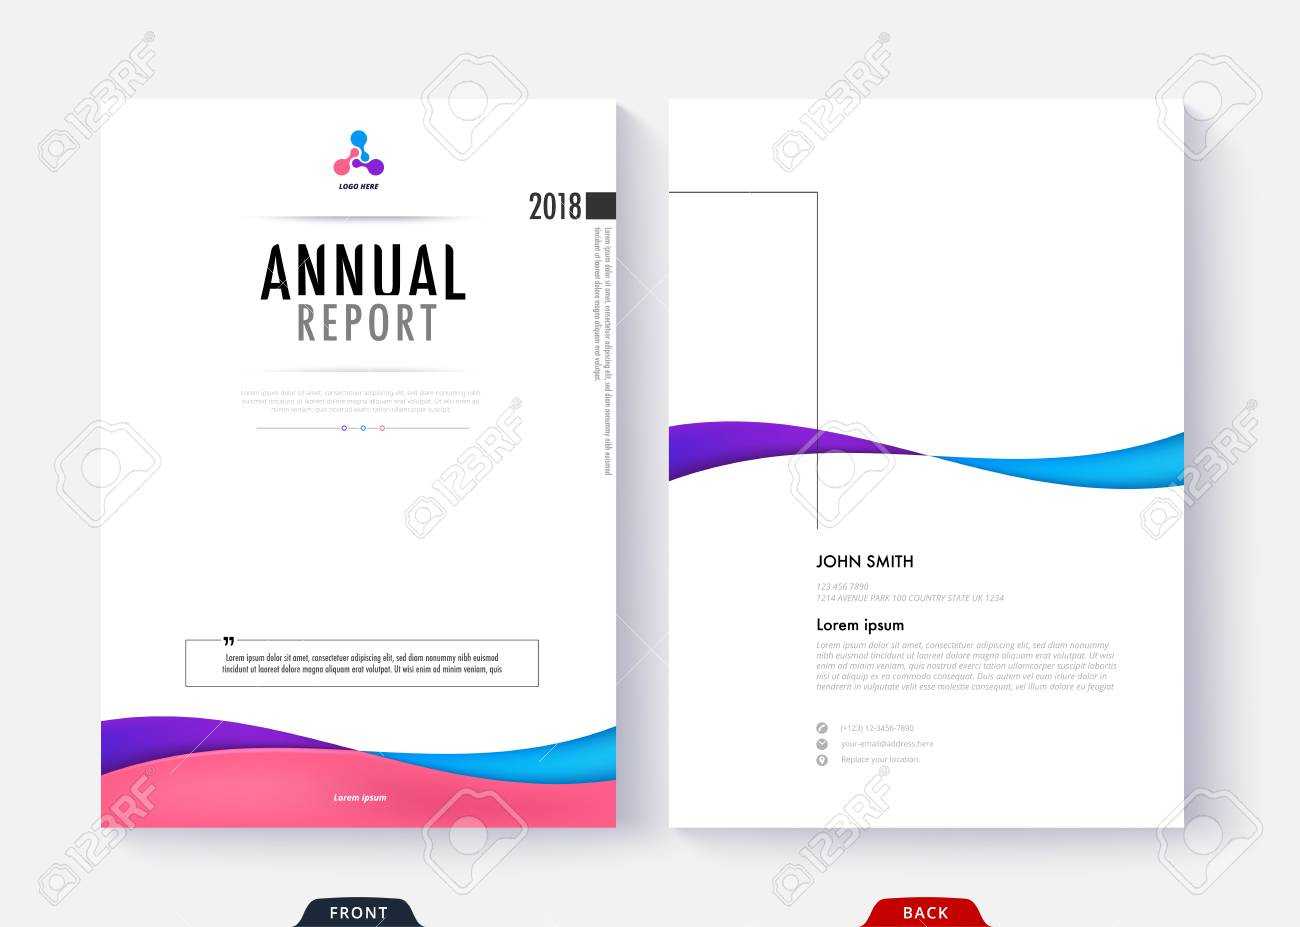 024 Report Cover Page Template Annual Design For Business Intended For Cover Page For Annual Report Template